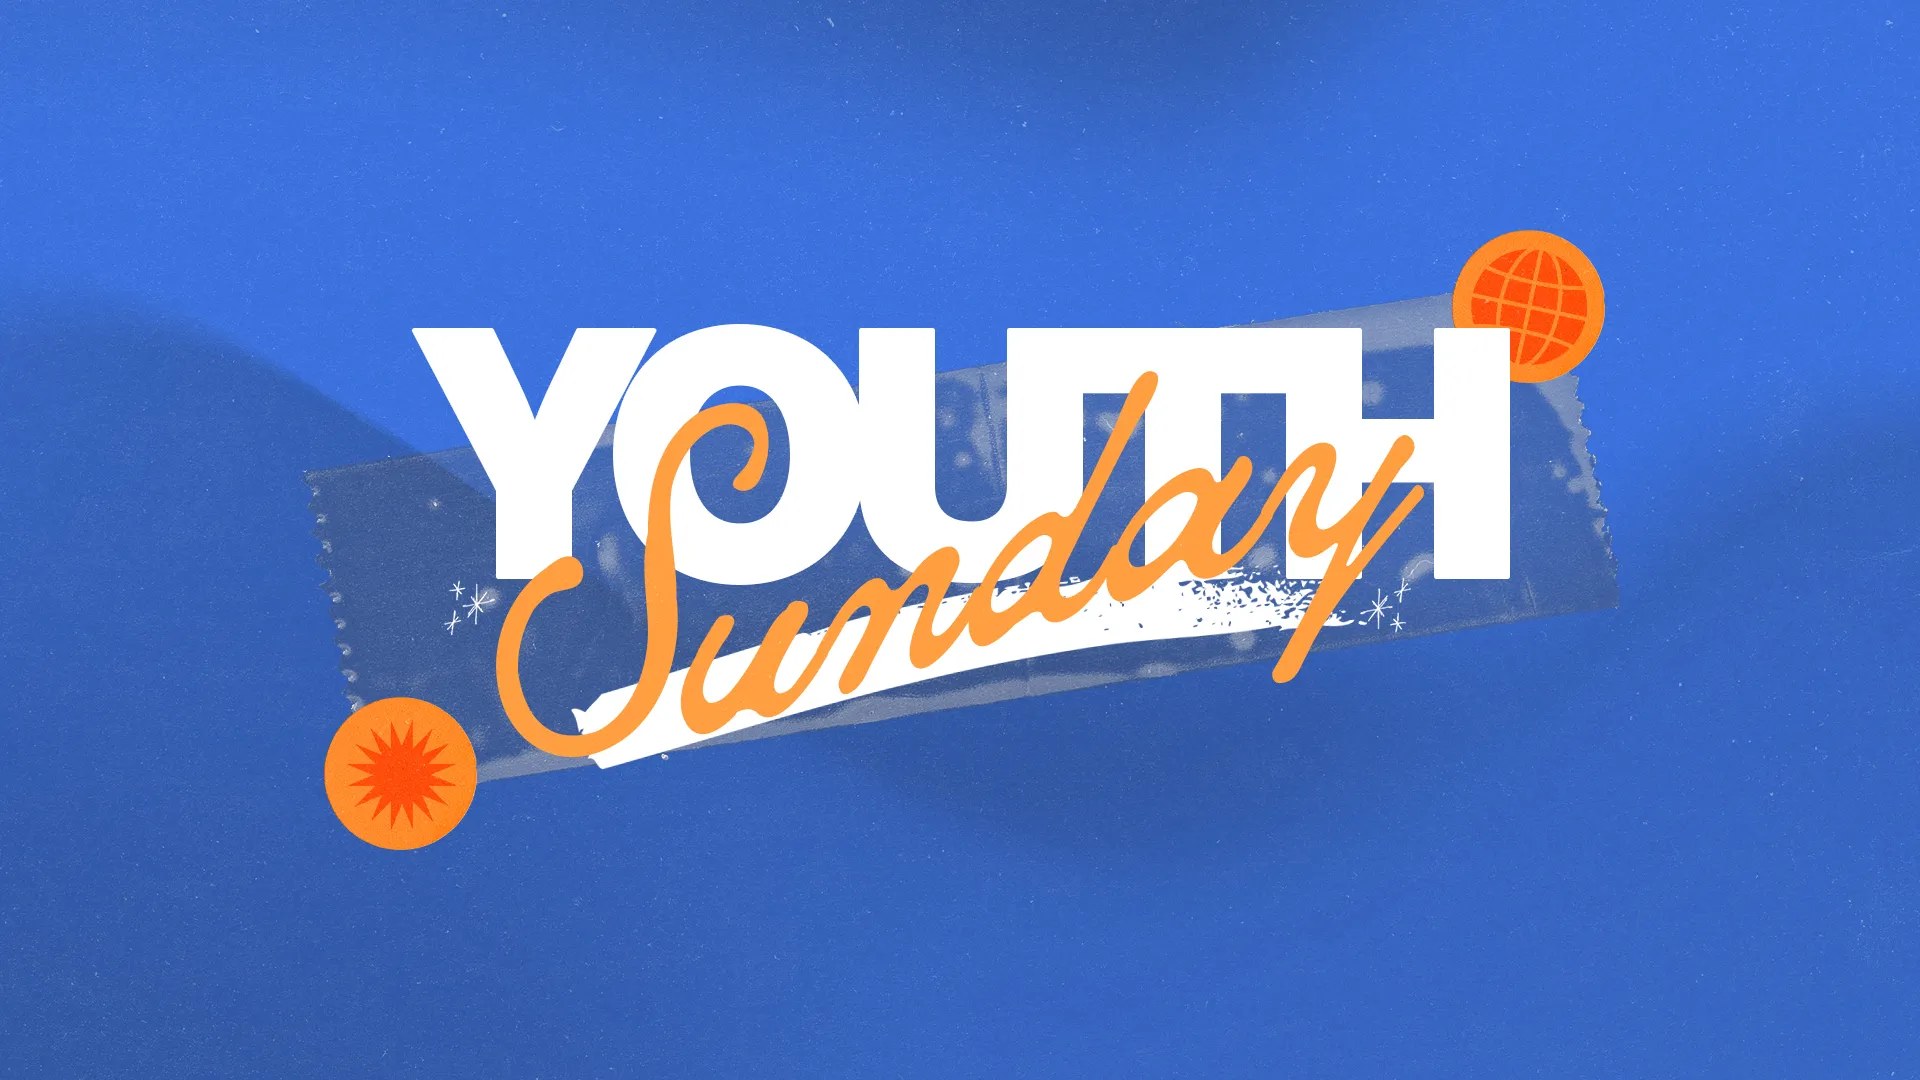 Energize Your Congregation With This Vibrant And Youthful Graphic, Ideal For Promoting Youth Sunday Services. This Eye-Catching Design Is Sure To Attract And Inspire Young Churchgoers For A Memorable Day Of Worship And Community.